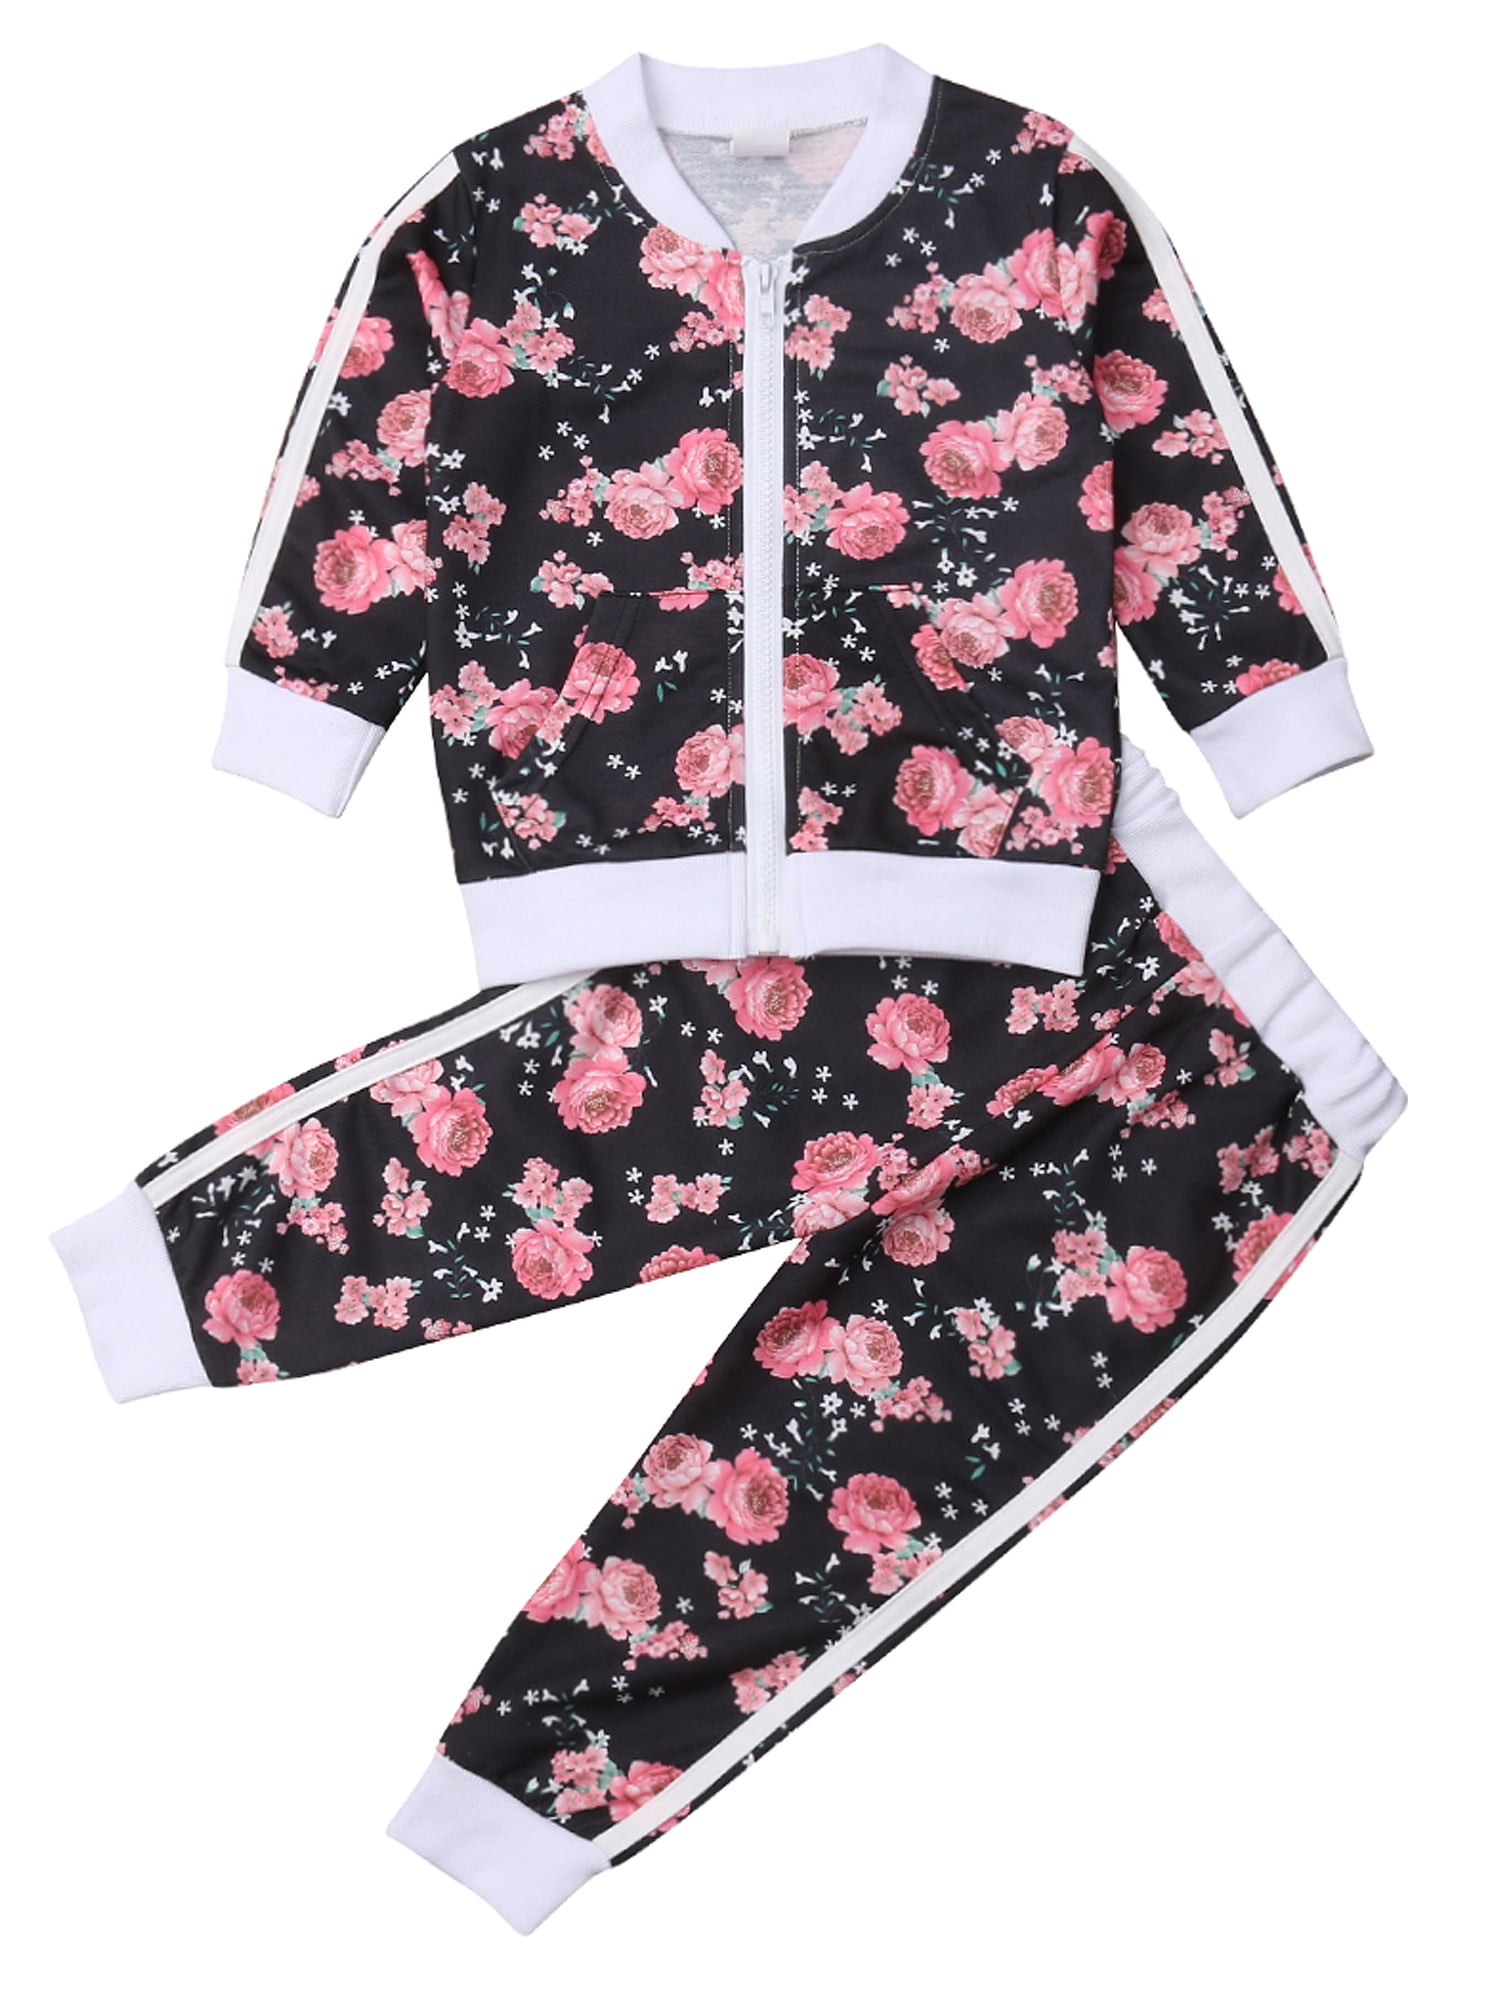 puseky Kid Baby Girls Floral Long Sleeve Hoodie Shirt Top Pants Tracksuit Outfits Set